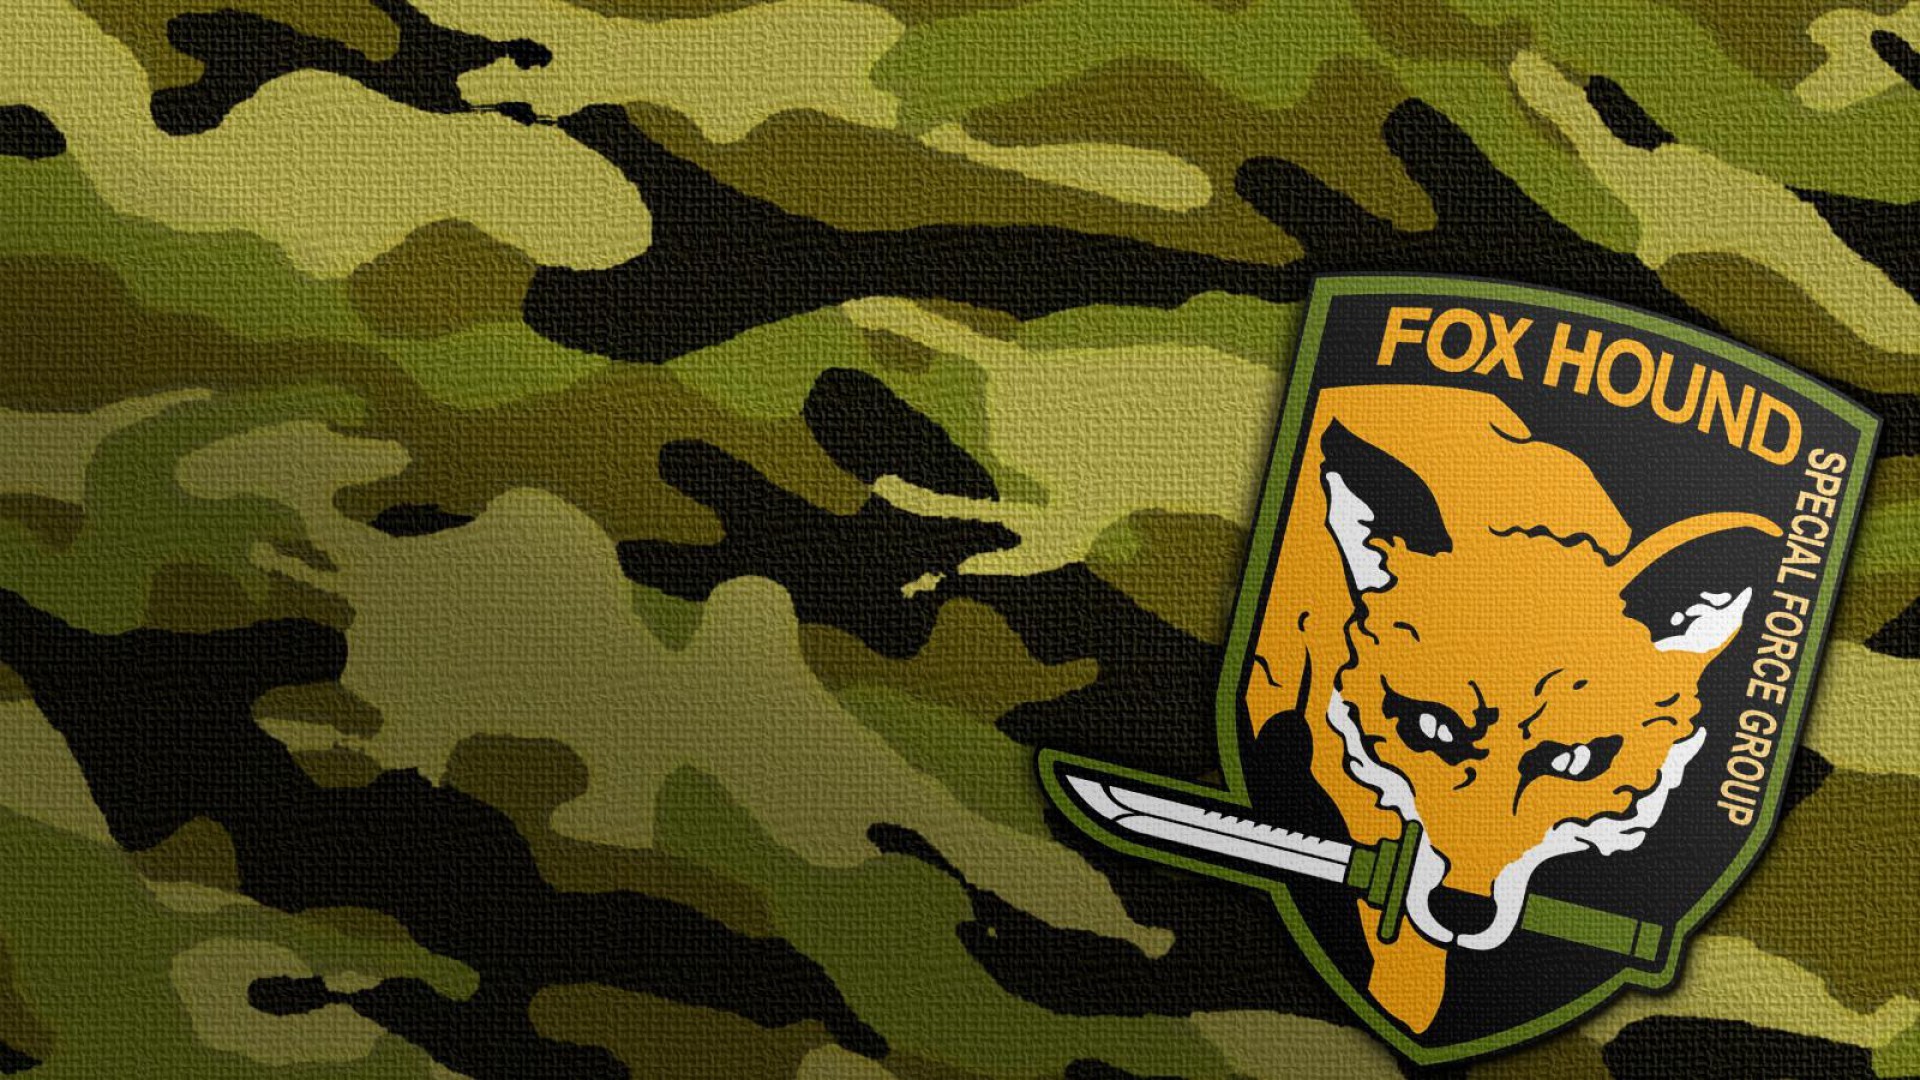 Metal Gear's Foxhound Patch.